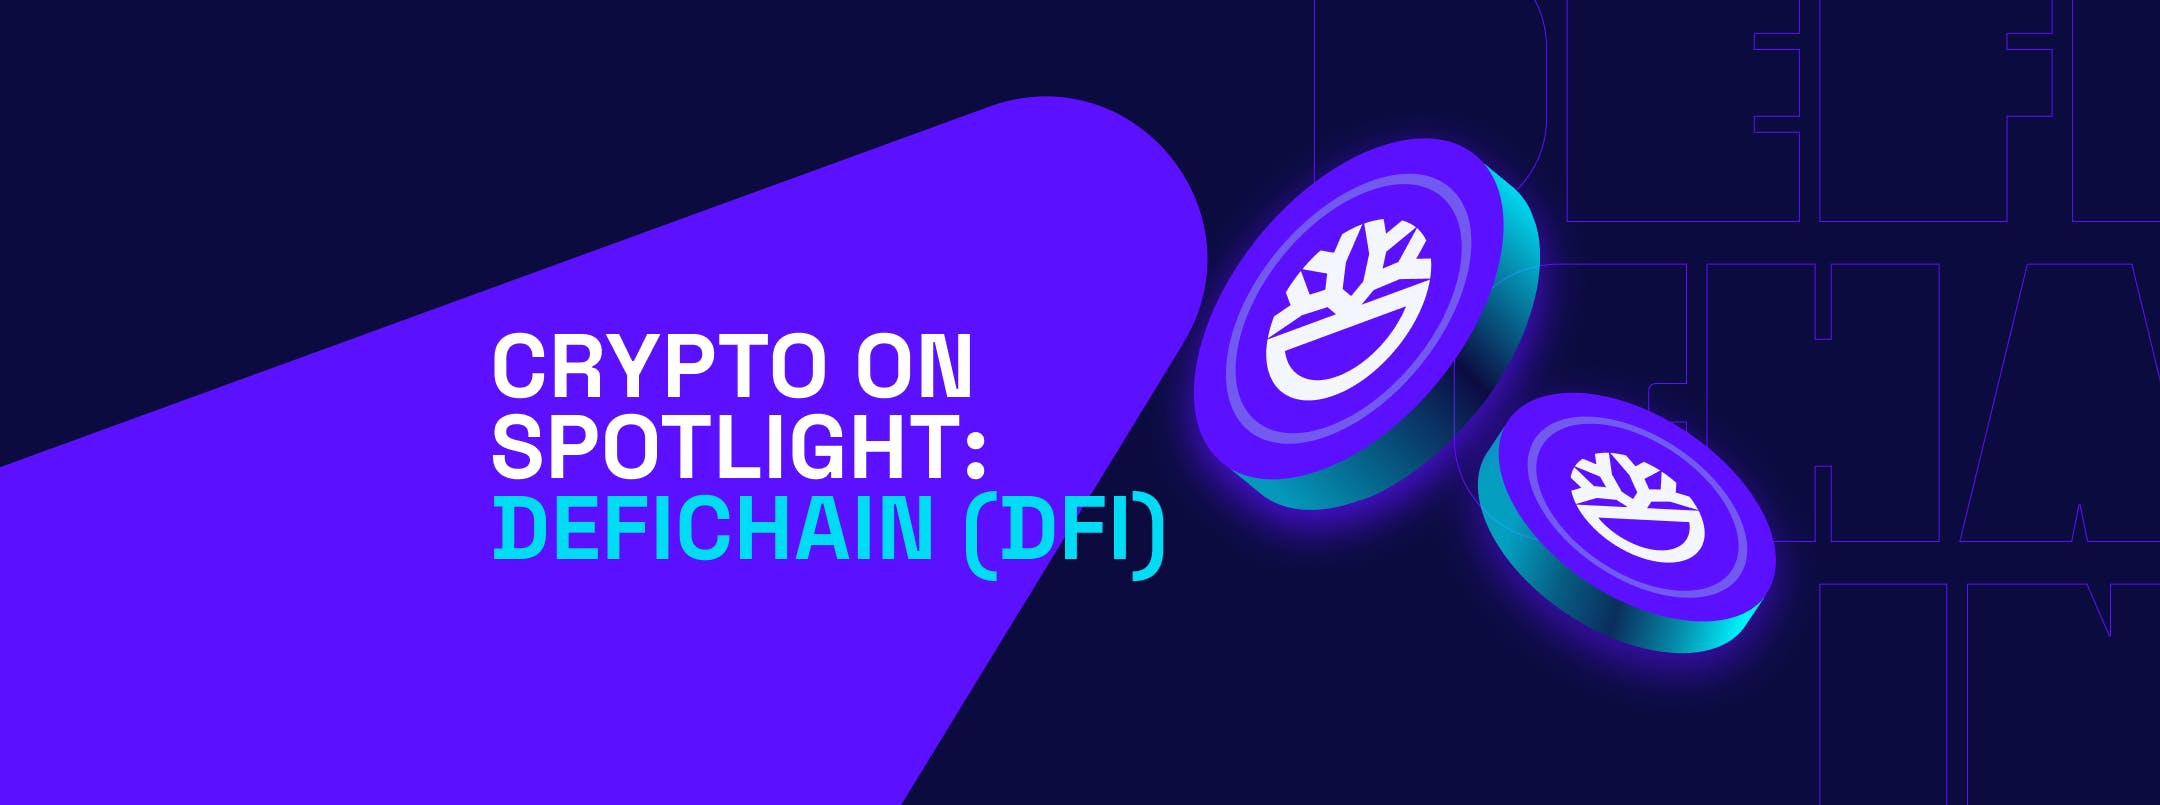 WHAT IS DEFI?
Exploring Decentralized Finance with DeFiChain (DFI)